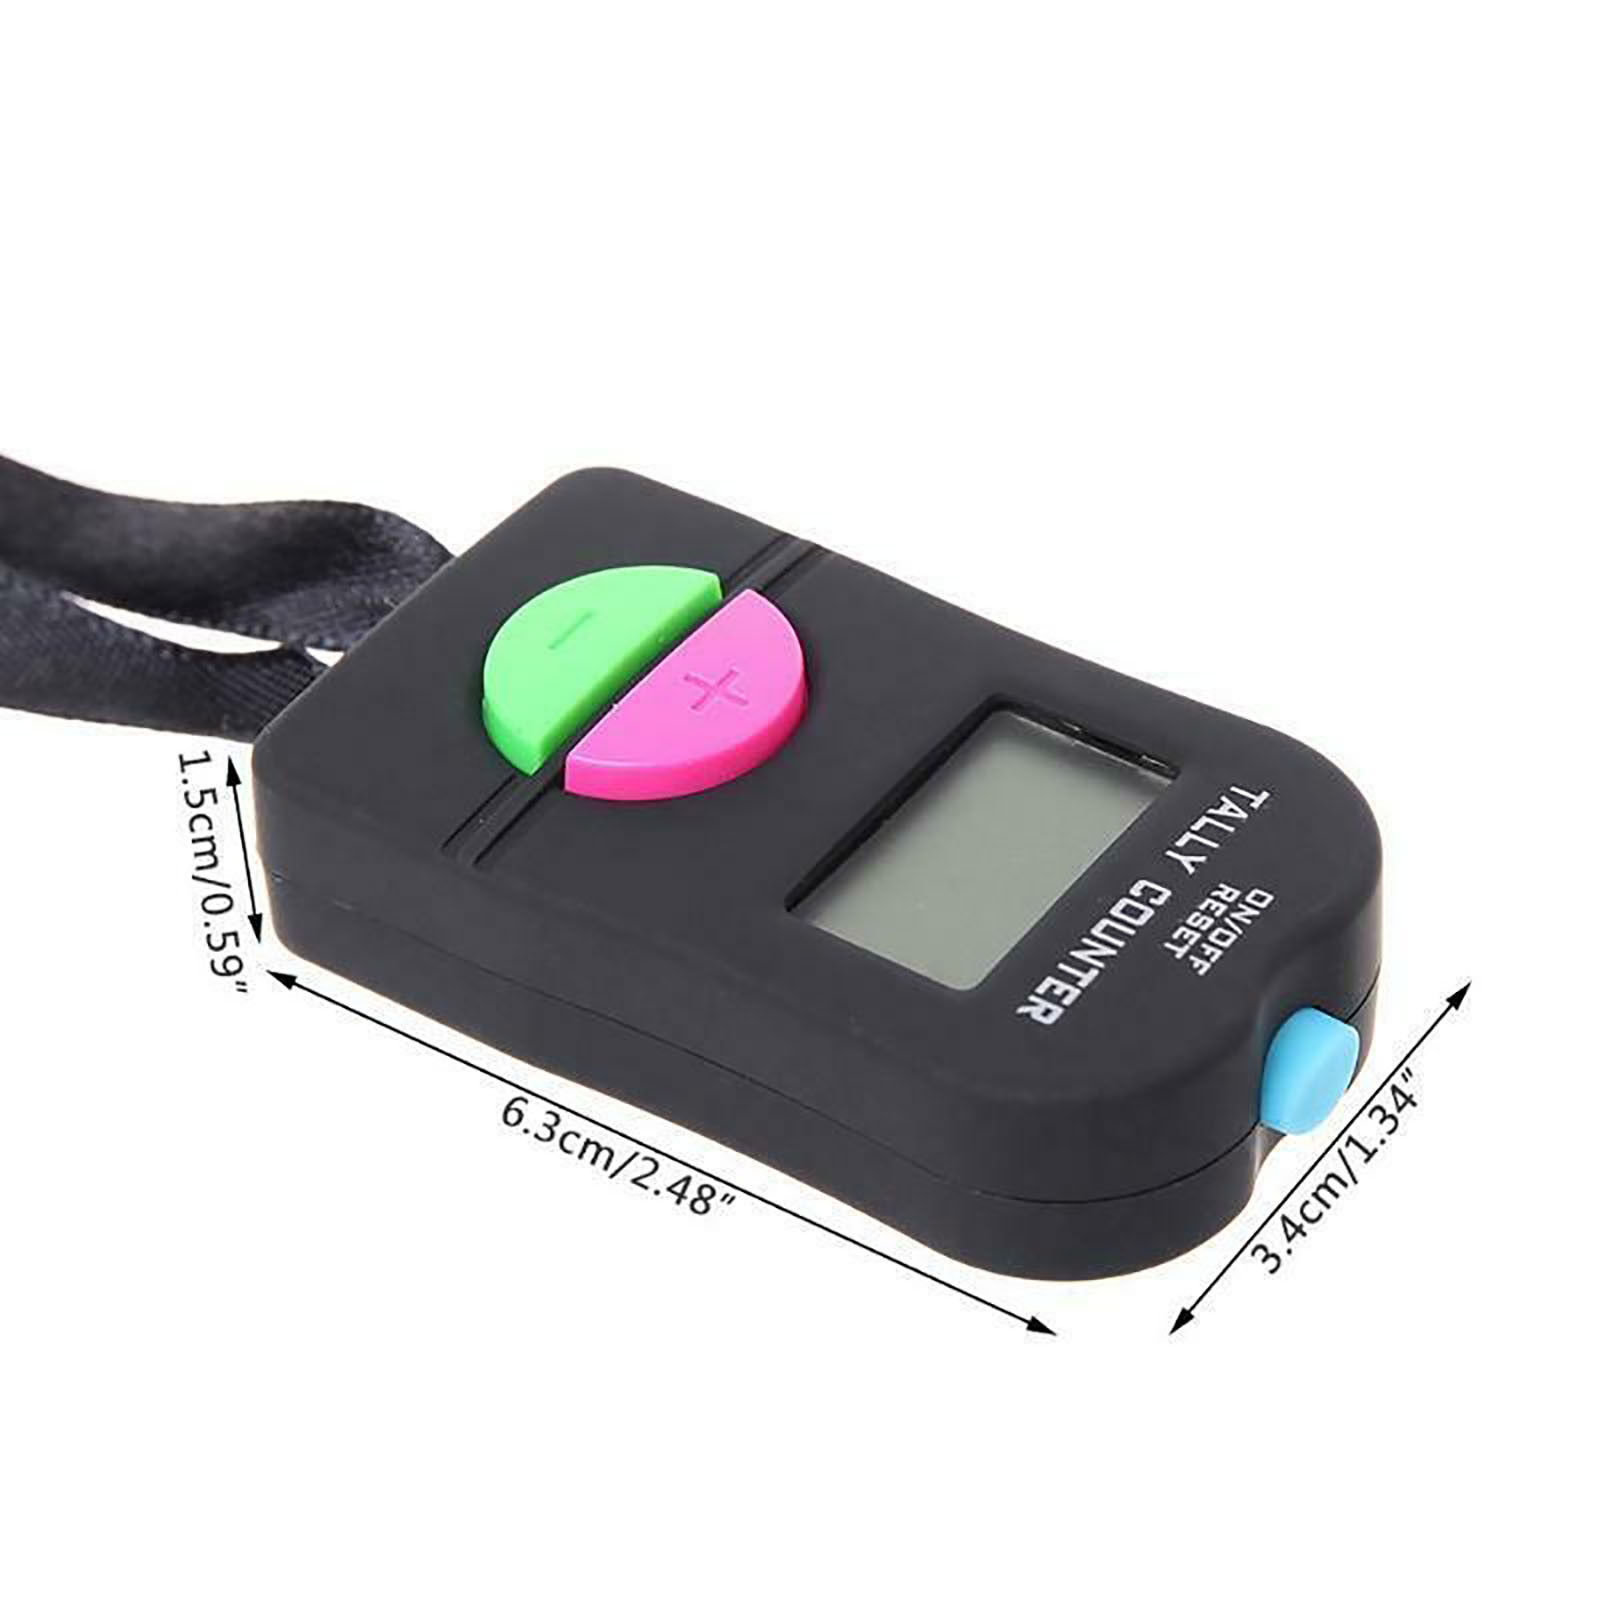 solacol Tally Counter Clicker Hand Tally Counter Golf Counter Clicker Digital Hand Tally Counter Electronic Manual Clicker Golf Gym Hand Held Counter Hand Counters Clickers - image 2 of 3